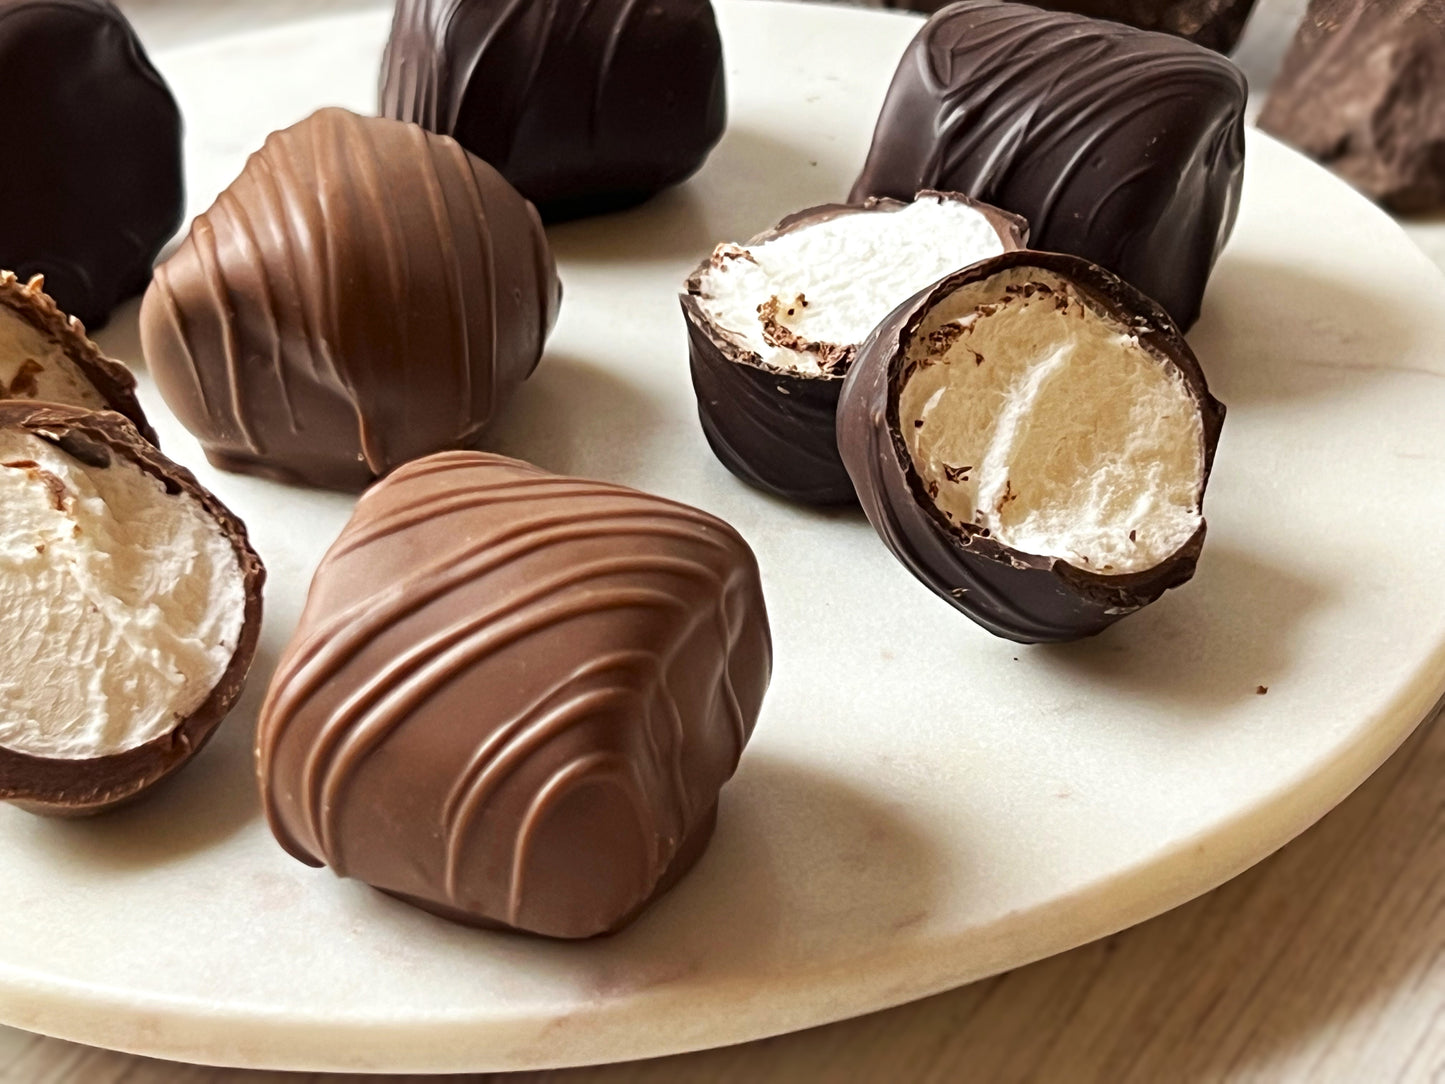 Chocolate covered Marshmallows